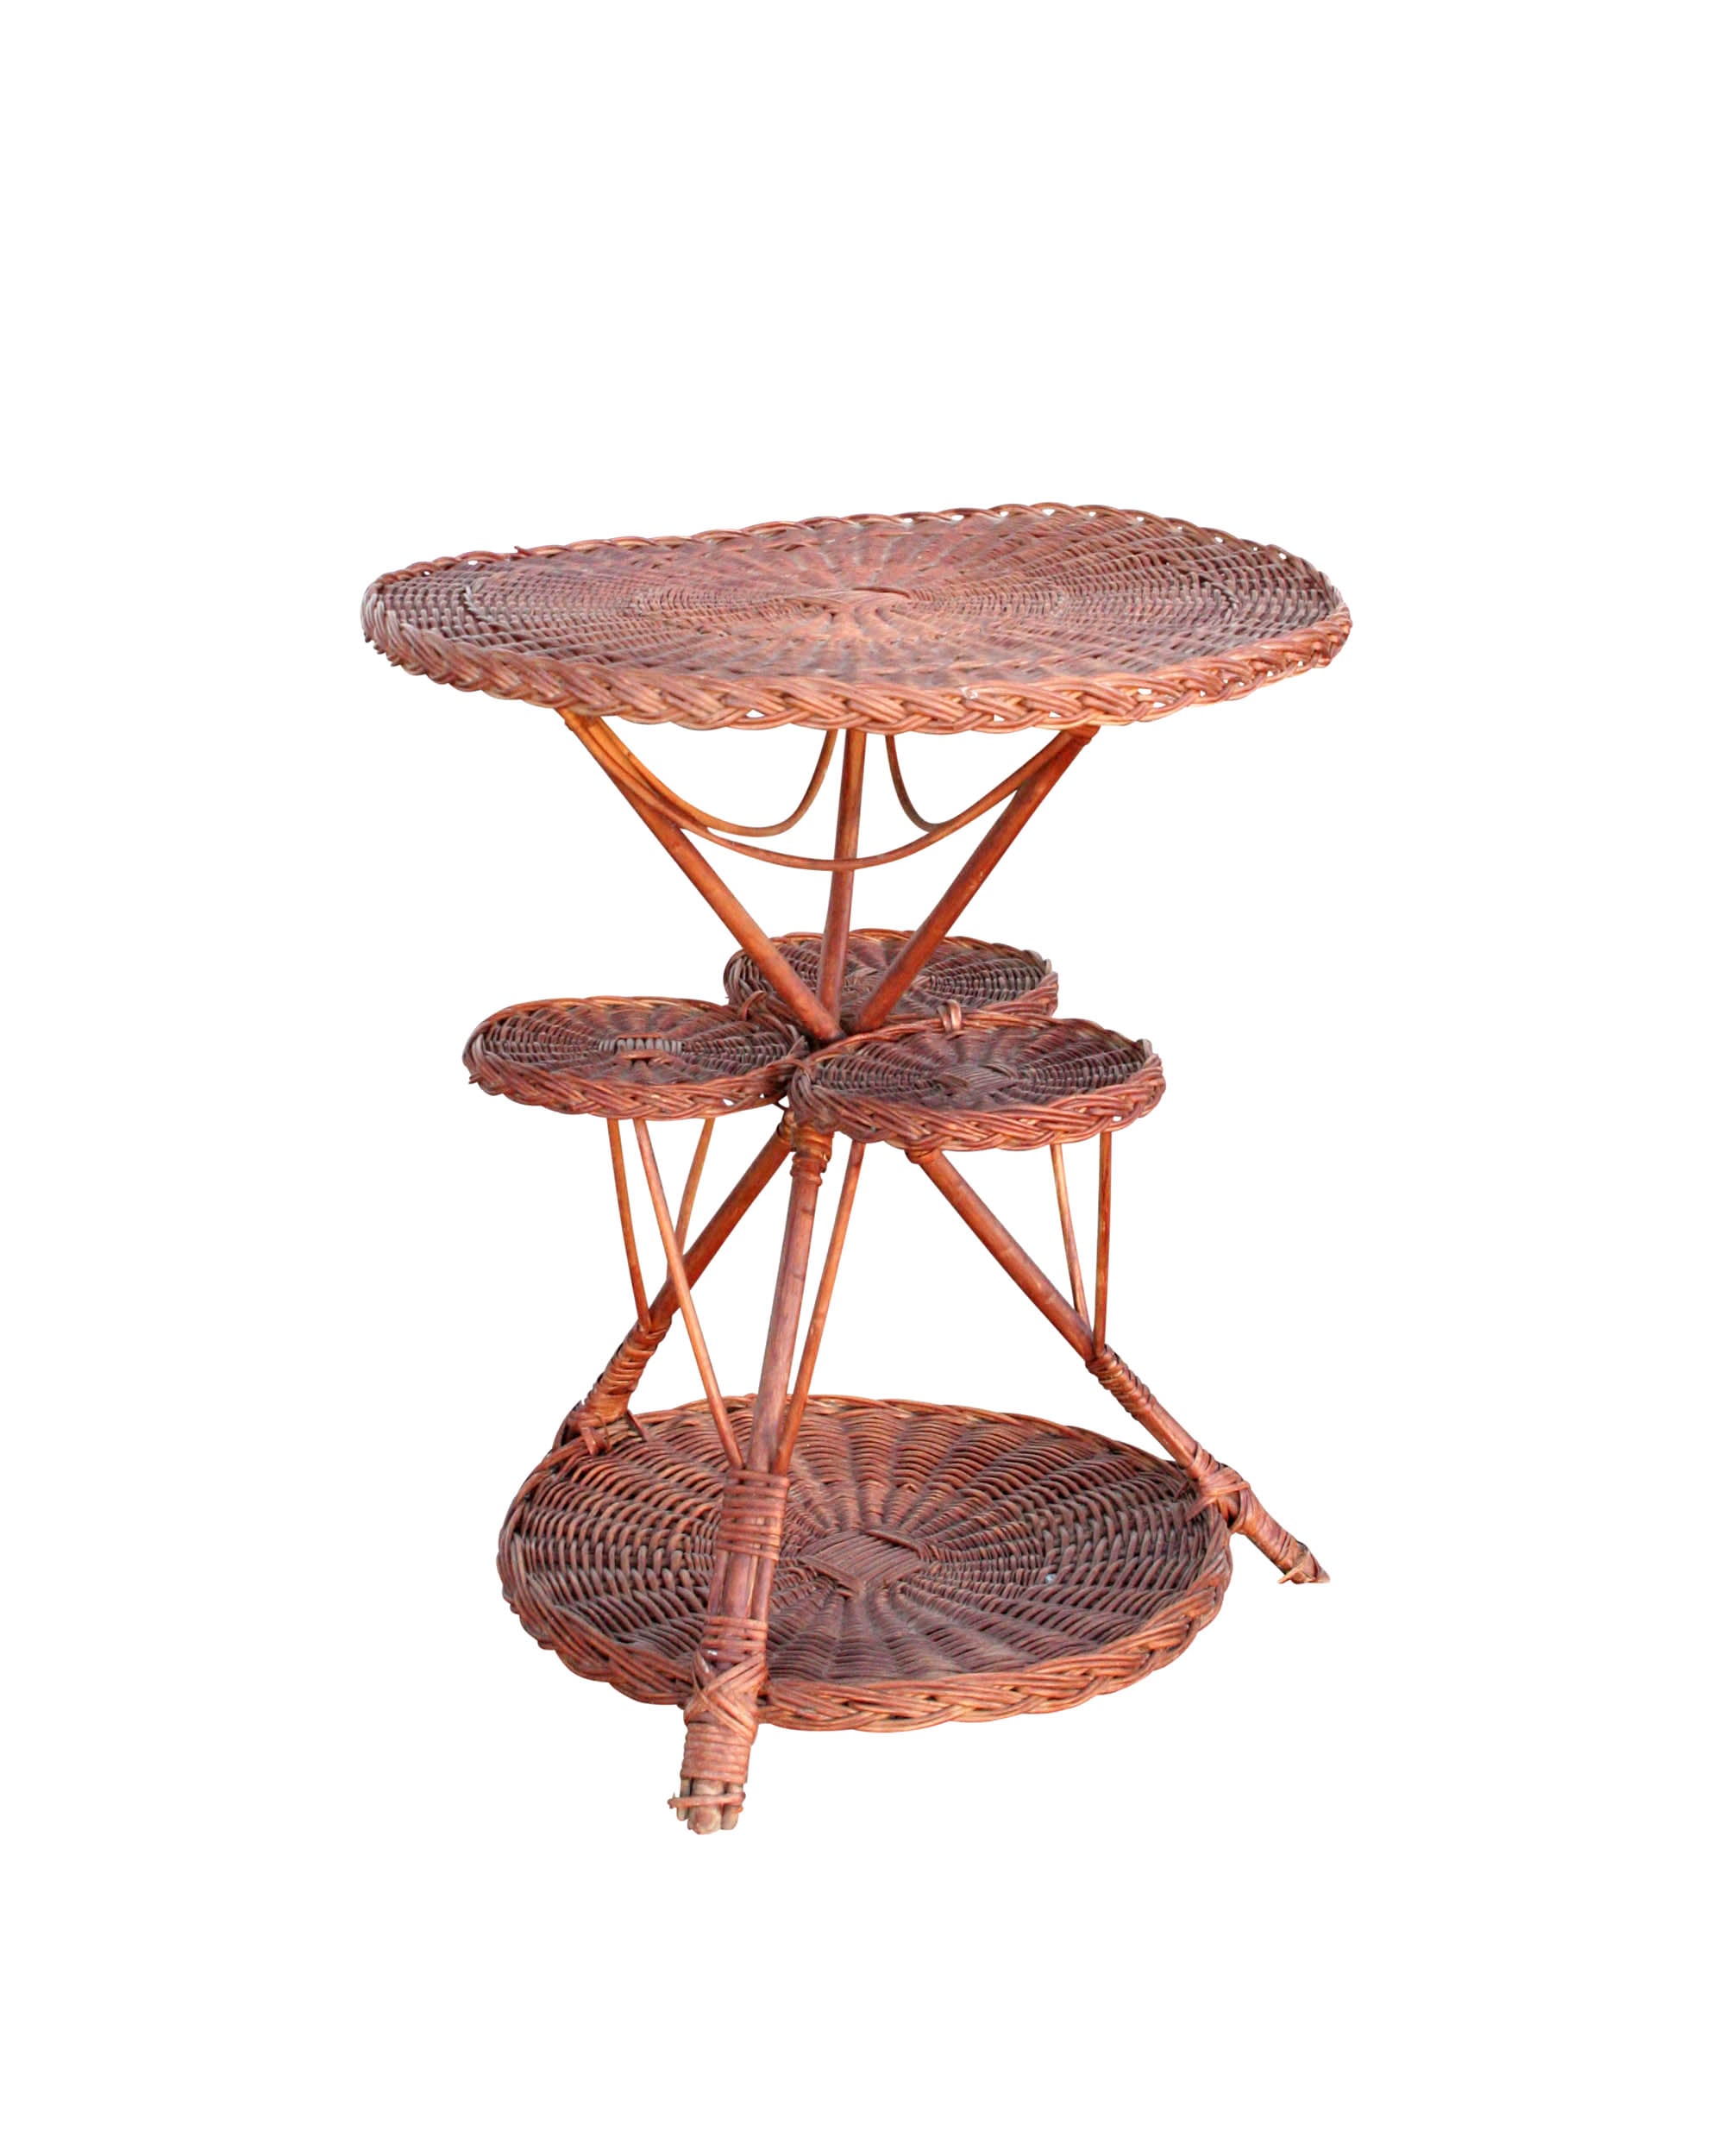 Circular wicker table with three levels